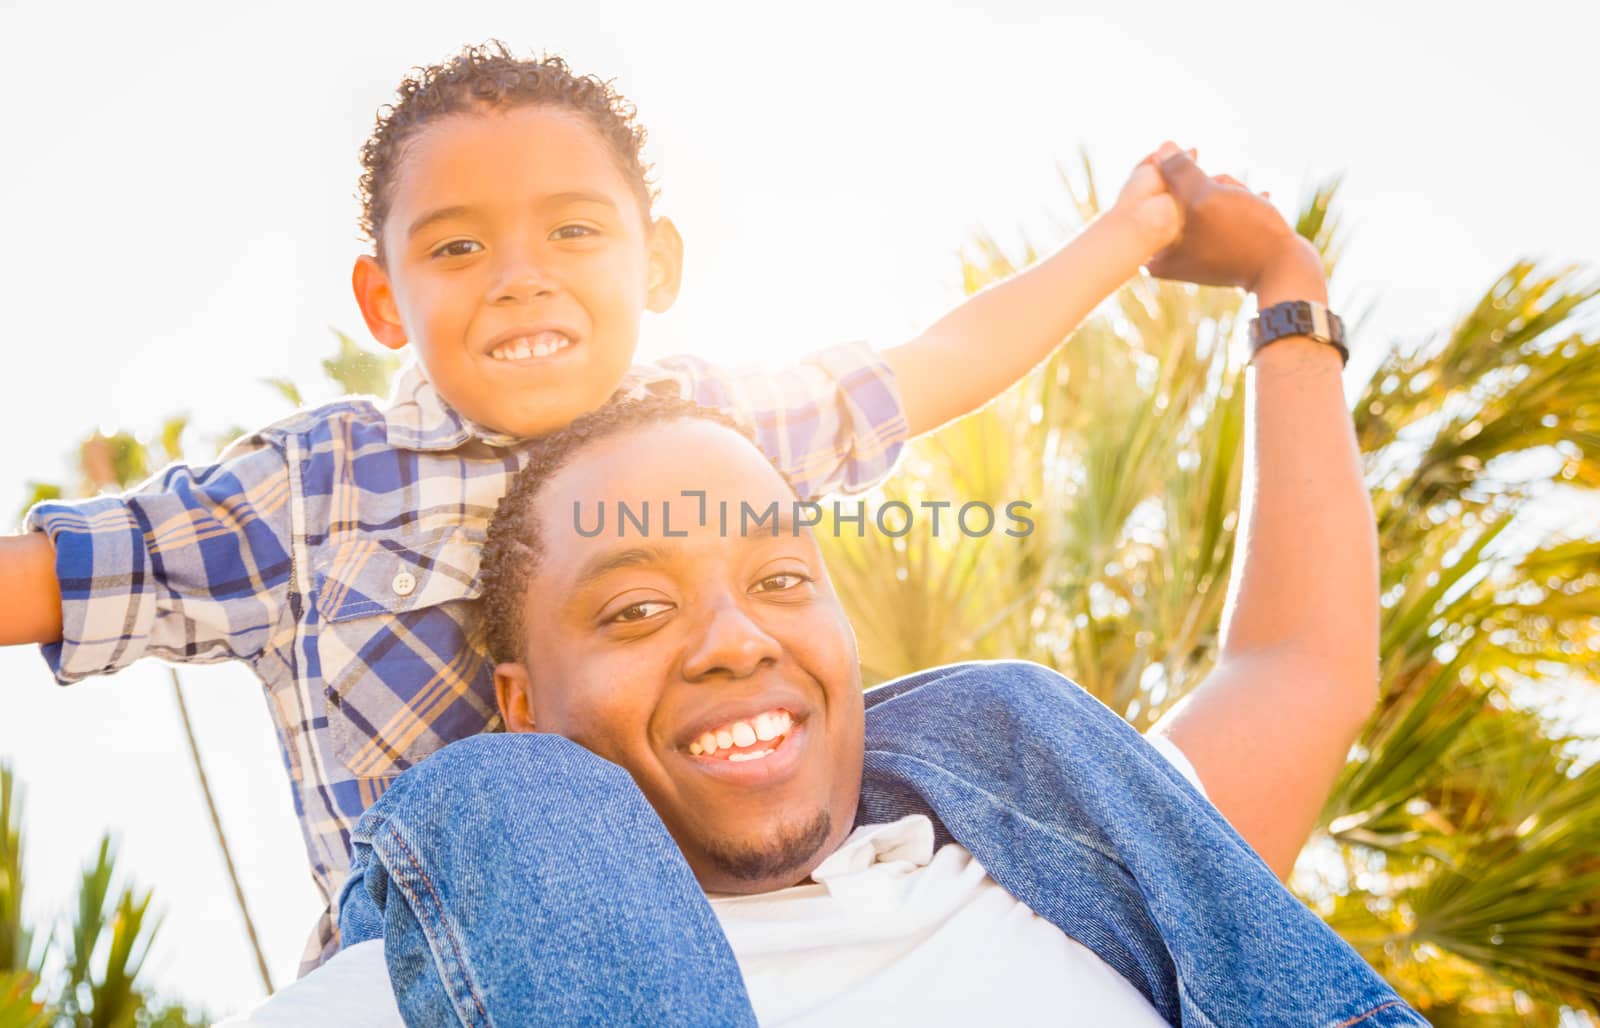 Mixed Race Son and African American Father Playing Piggyback Outdoors Together.